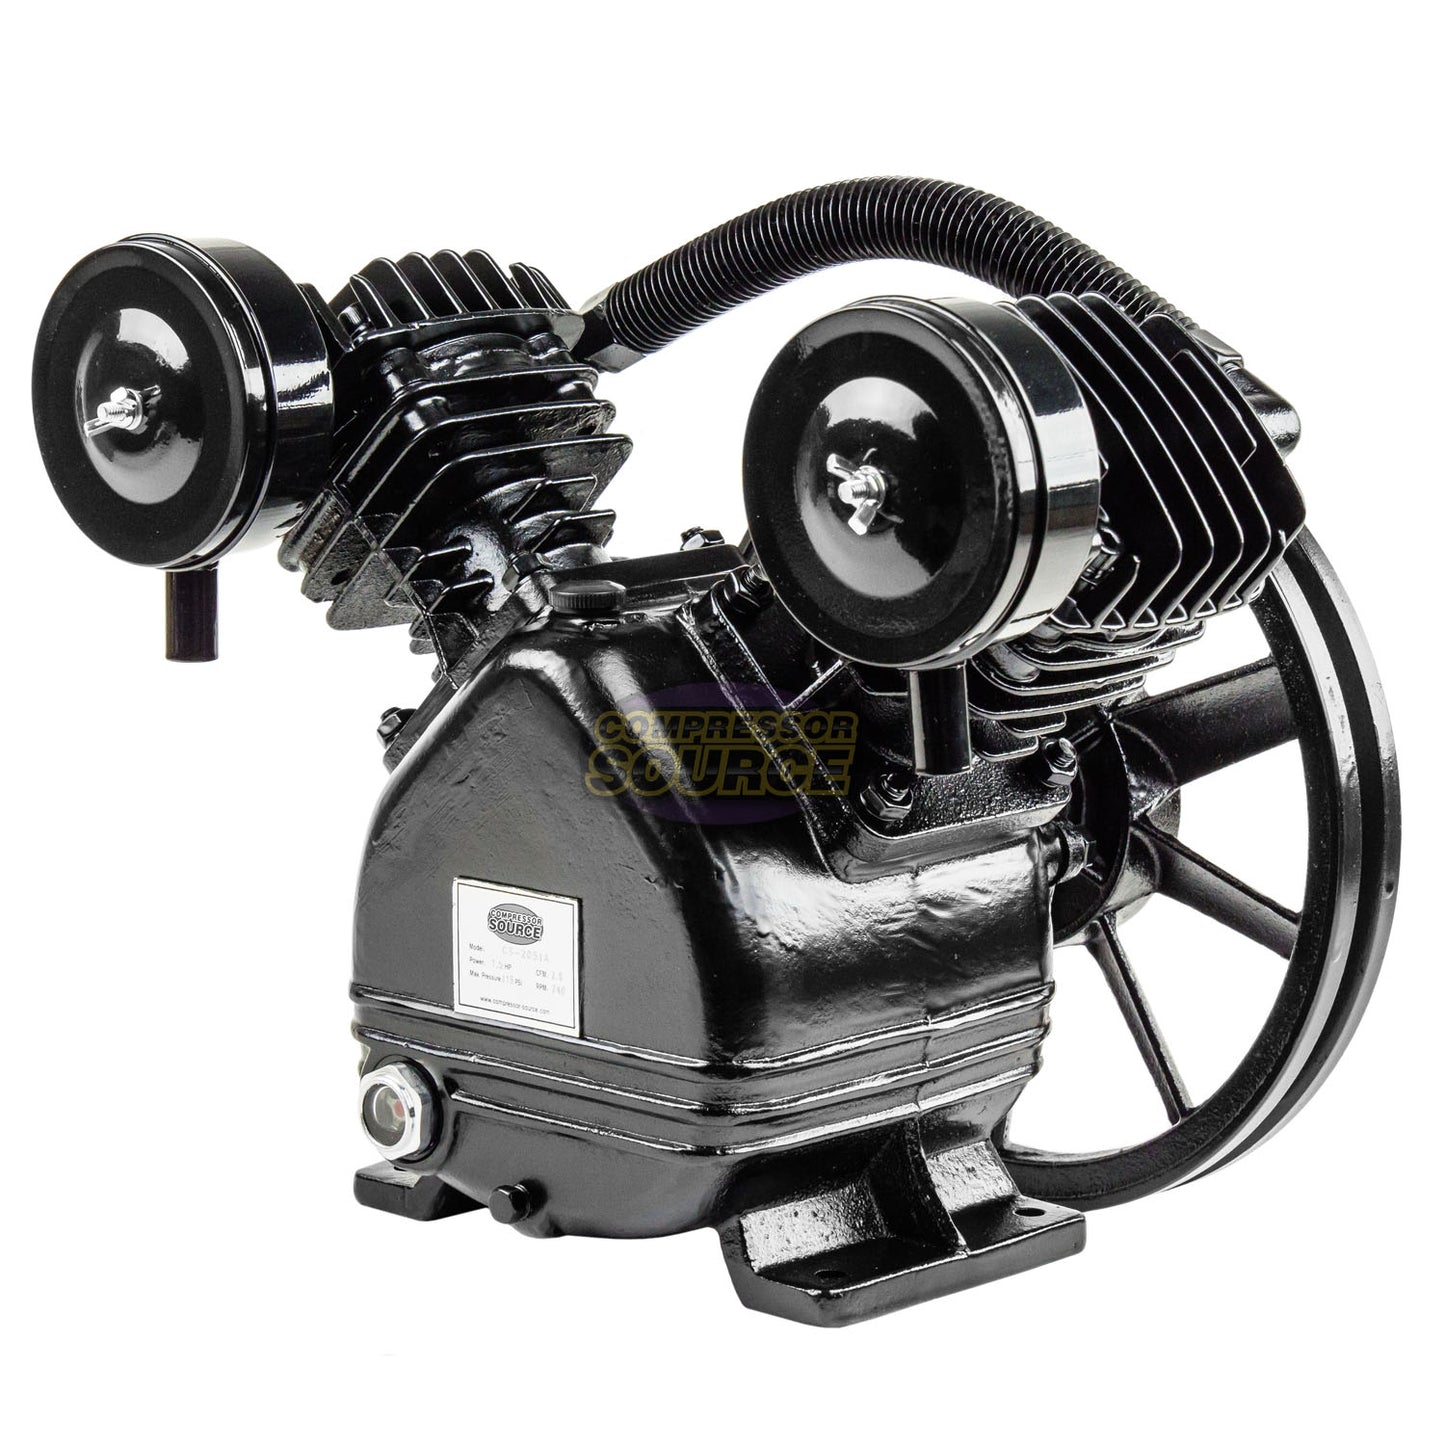 1.5 to 2 HP Replacement Air Compressor Pump Single Stage 2 Cylinder 4.5 CFM